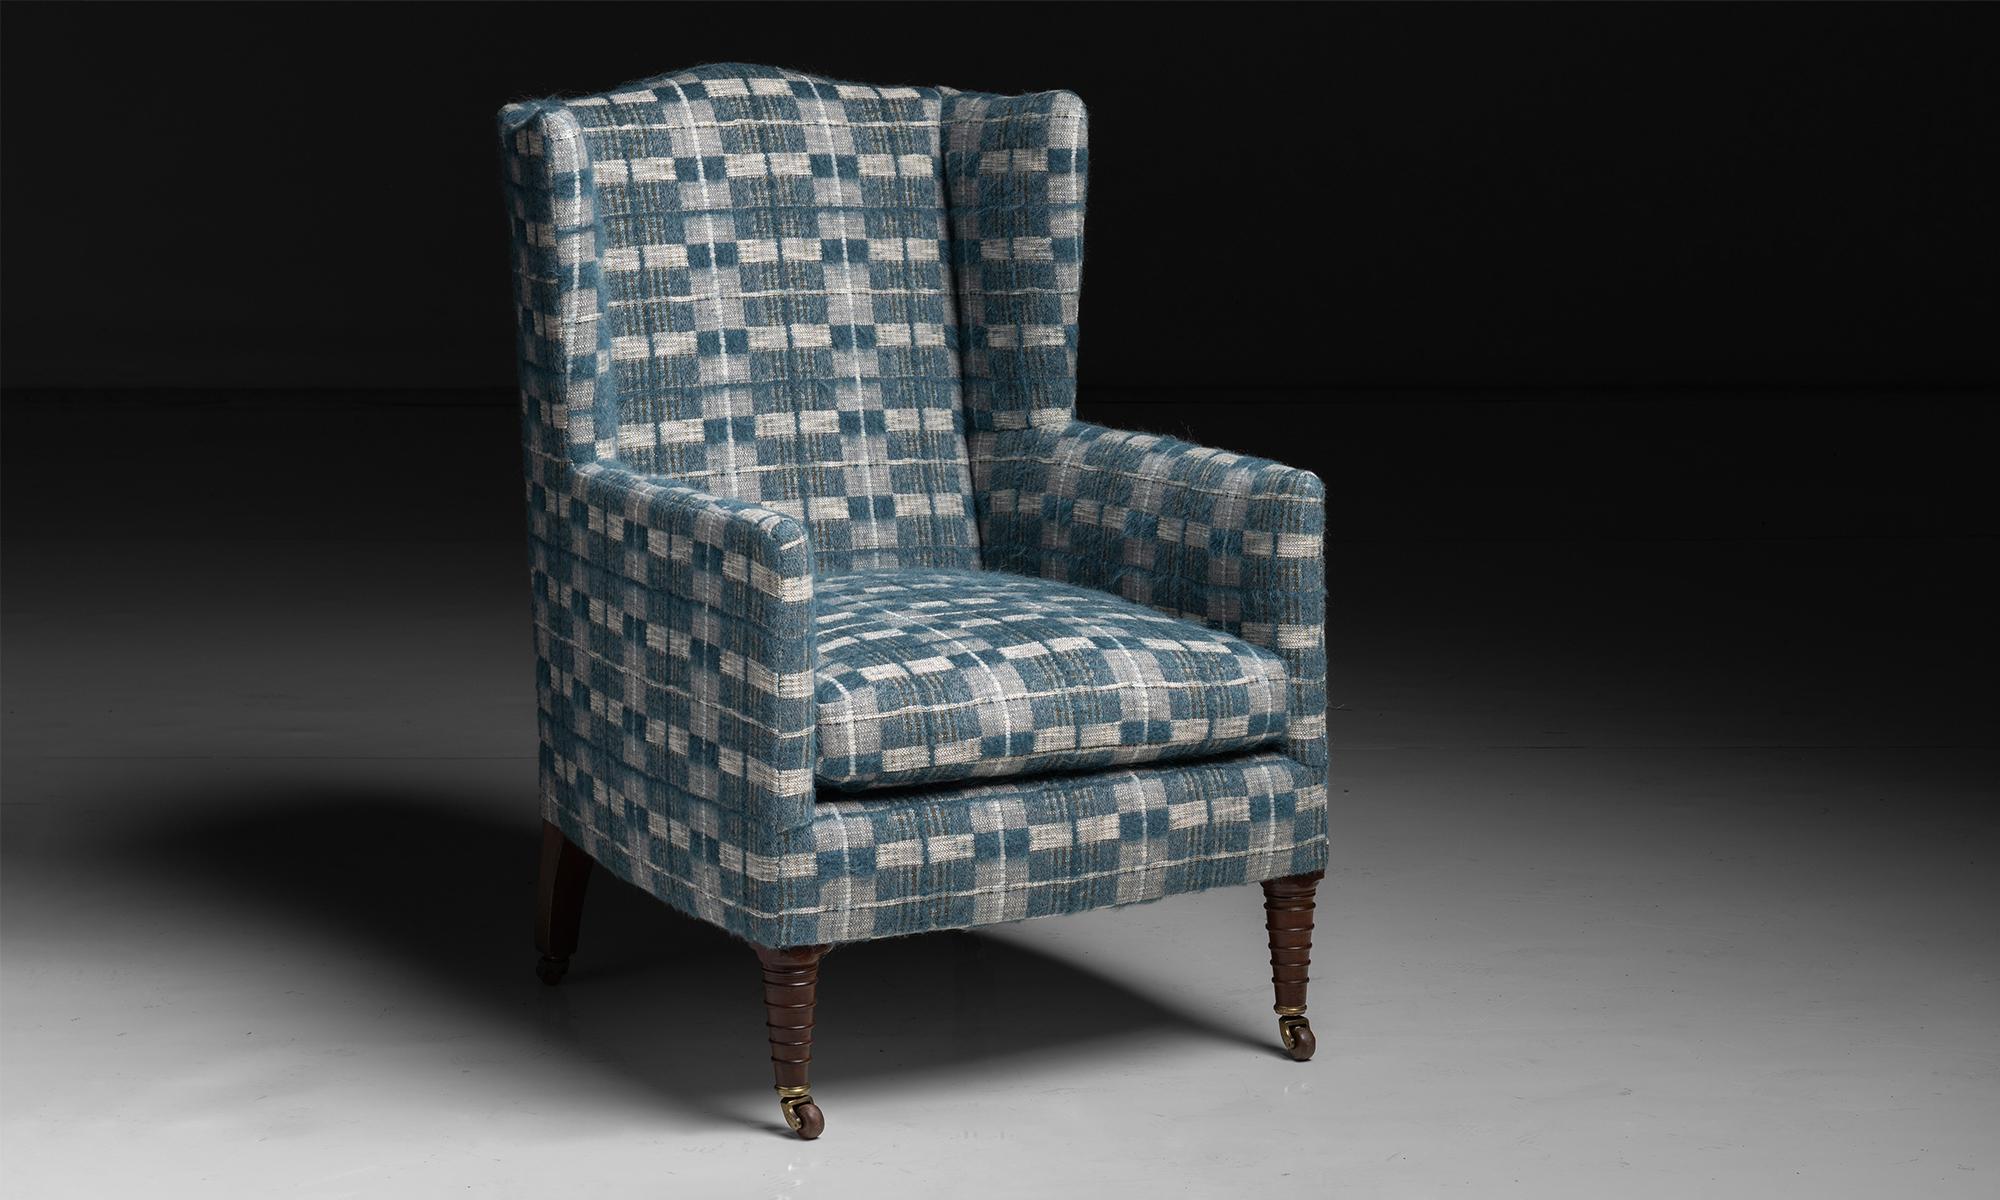 Wing Chair in Mohair by Pierre Frey

England circa 1900

Newly upholstery in mohair blend by Pierre Frey

26.5”w x 29”d x 40”h x 18”seat